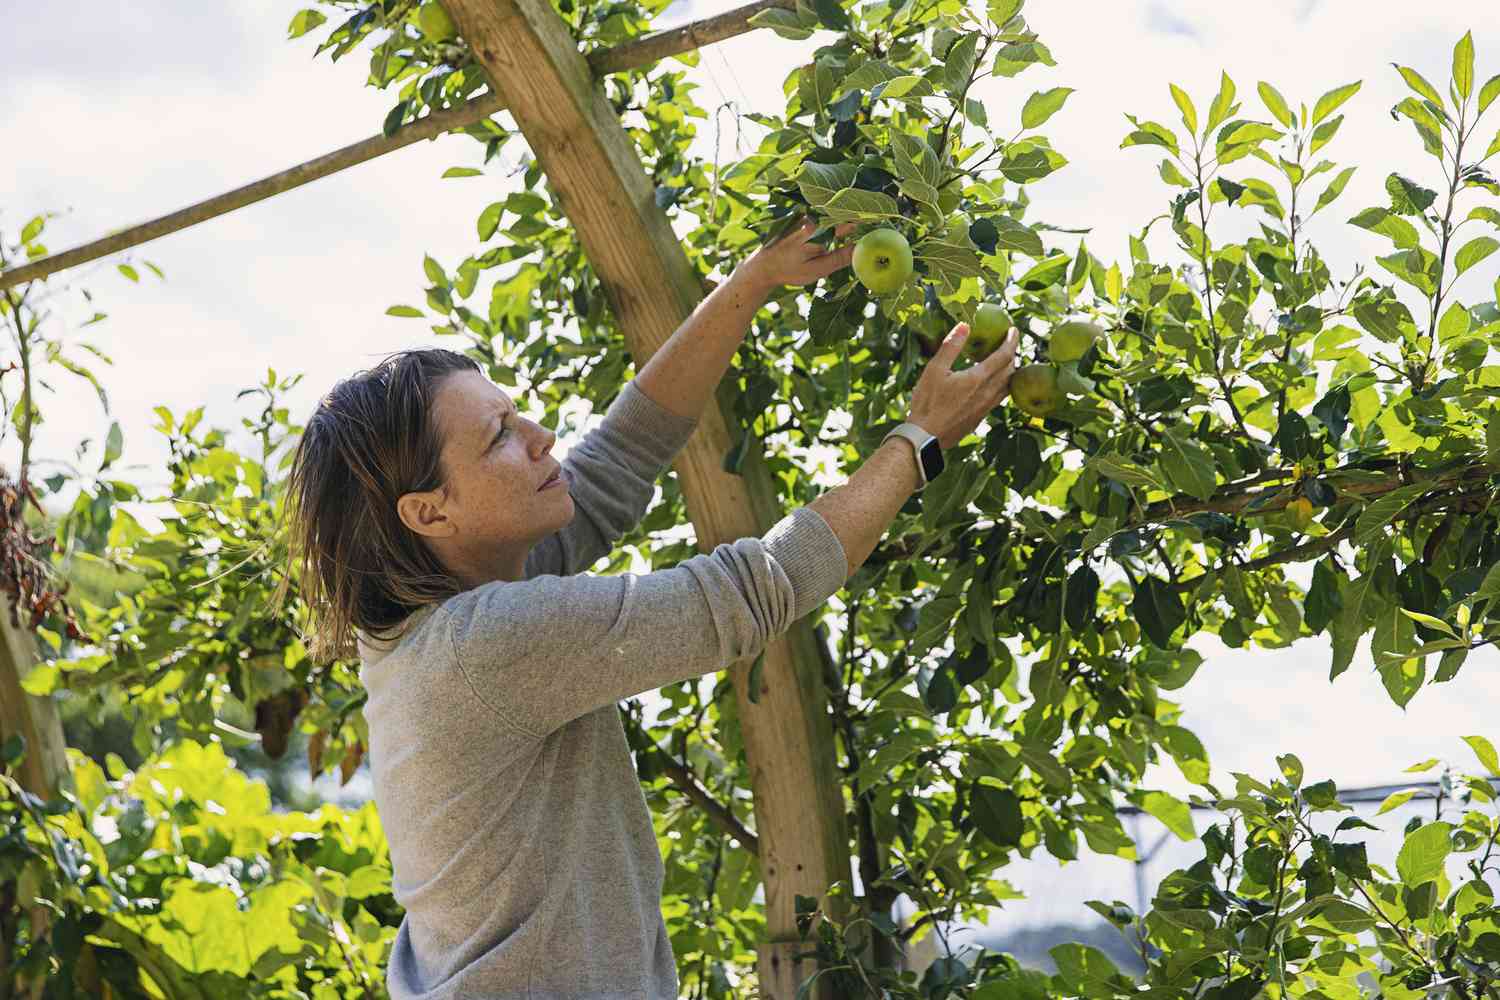 How To Take Care Of Fruit Trees